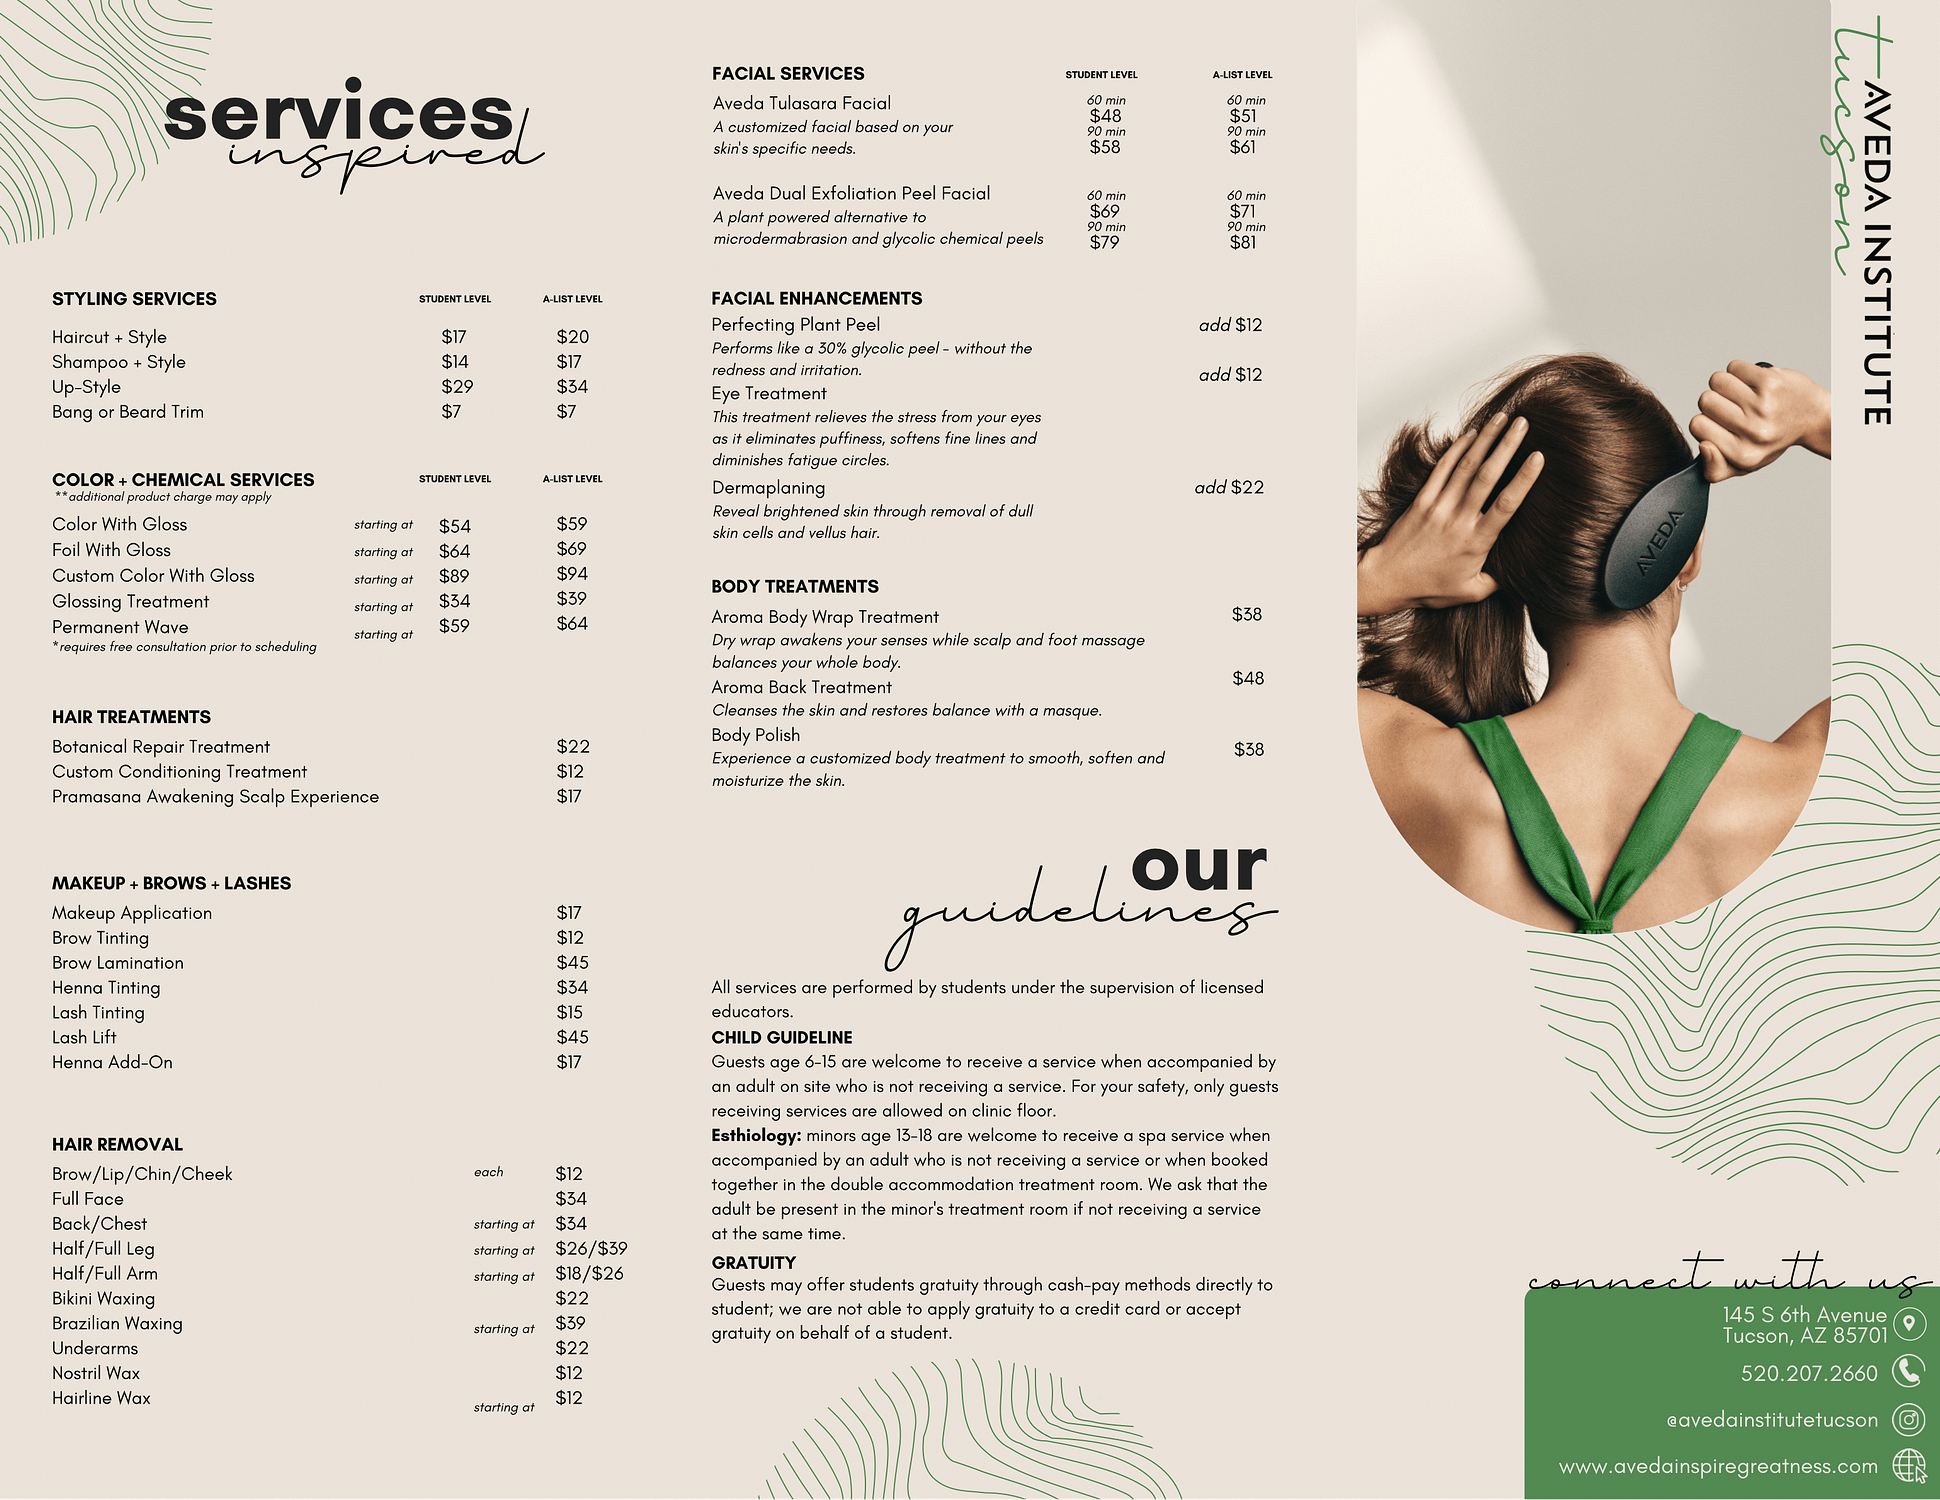 Menu of services offered at Aveda Institute Tucson